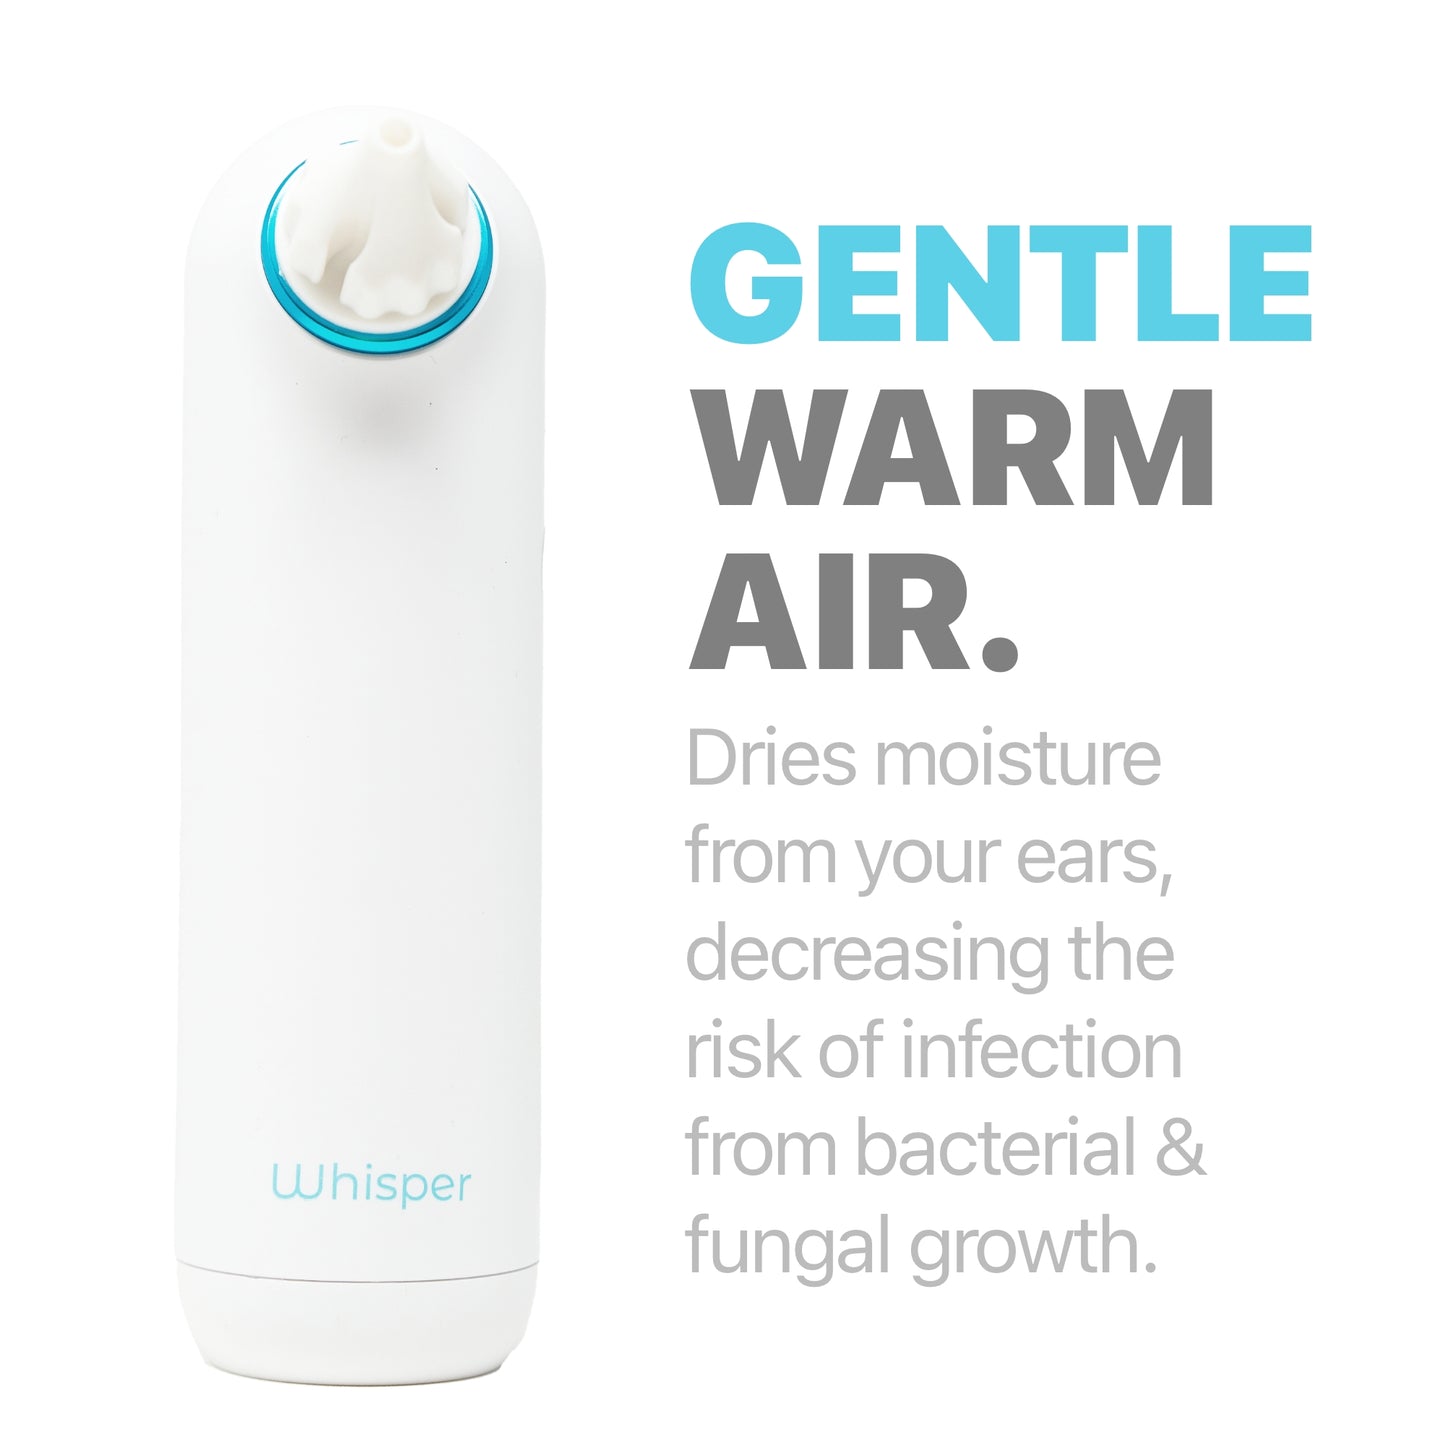 Whisper Ear Dryer description of gentle warm air that dries water from ears.